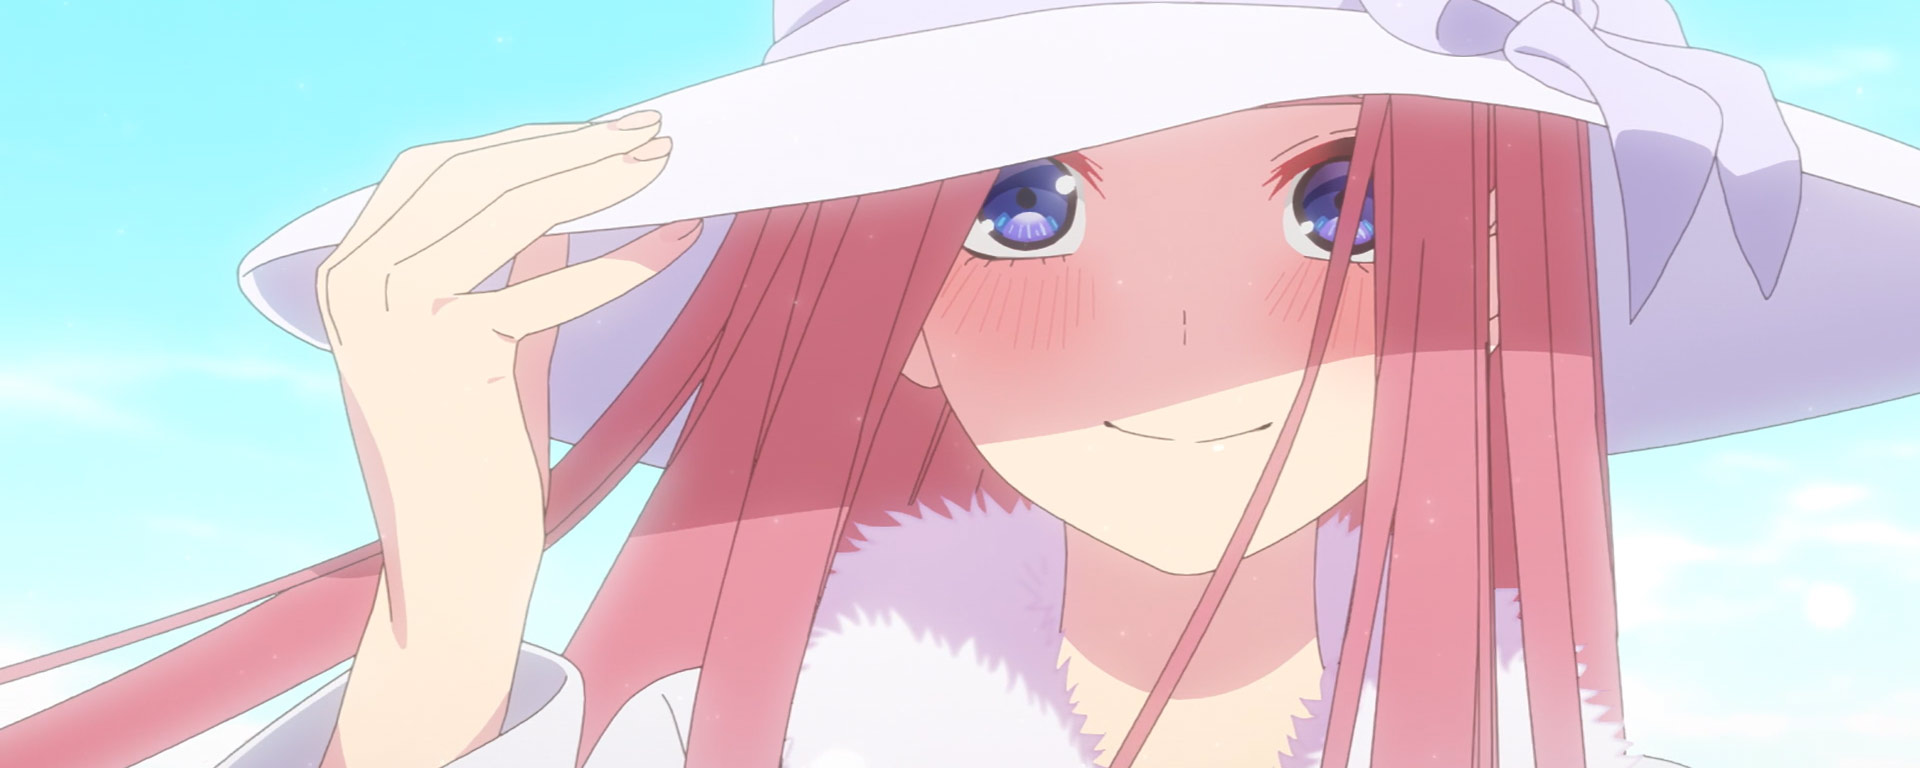 One of the quintessential girls in the anime The Quintessential Quintuplets